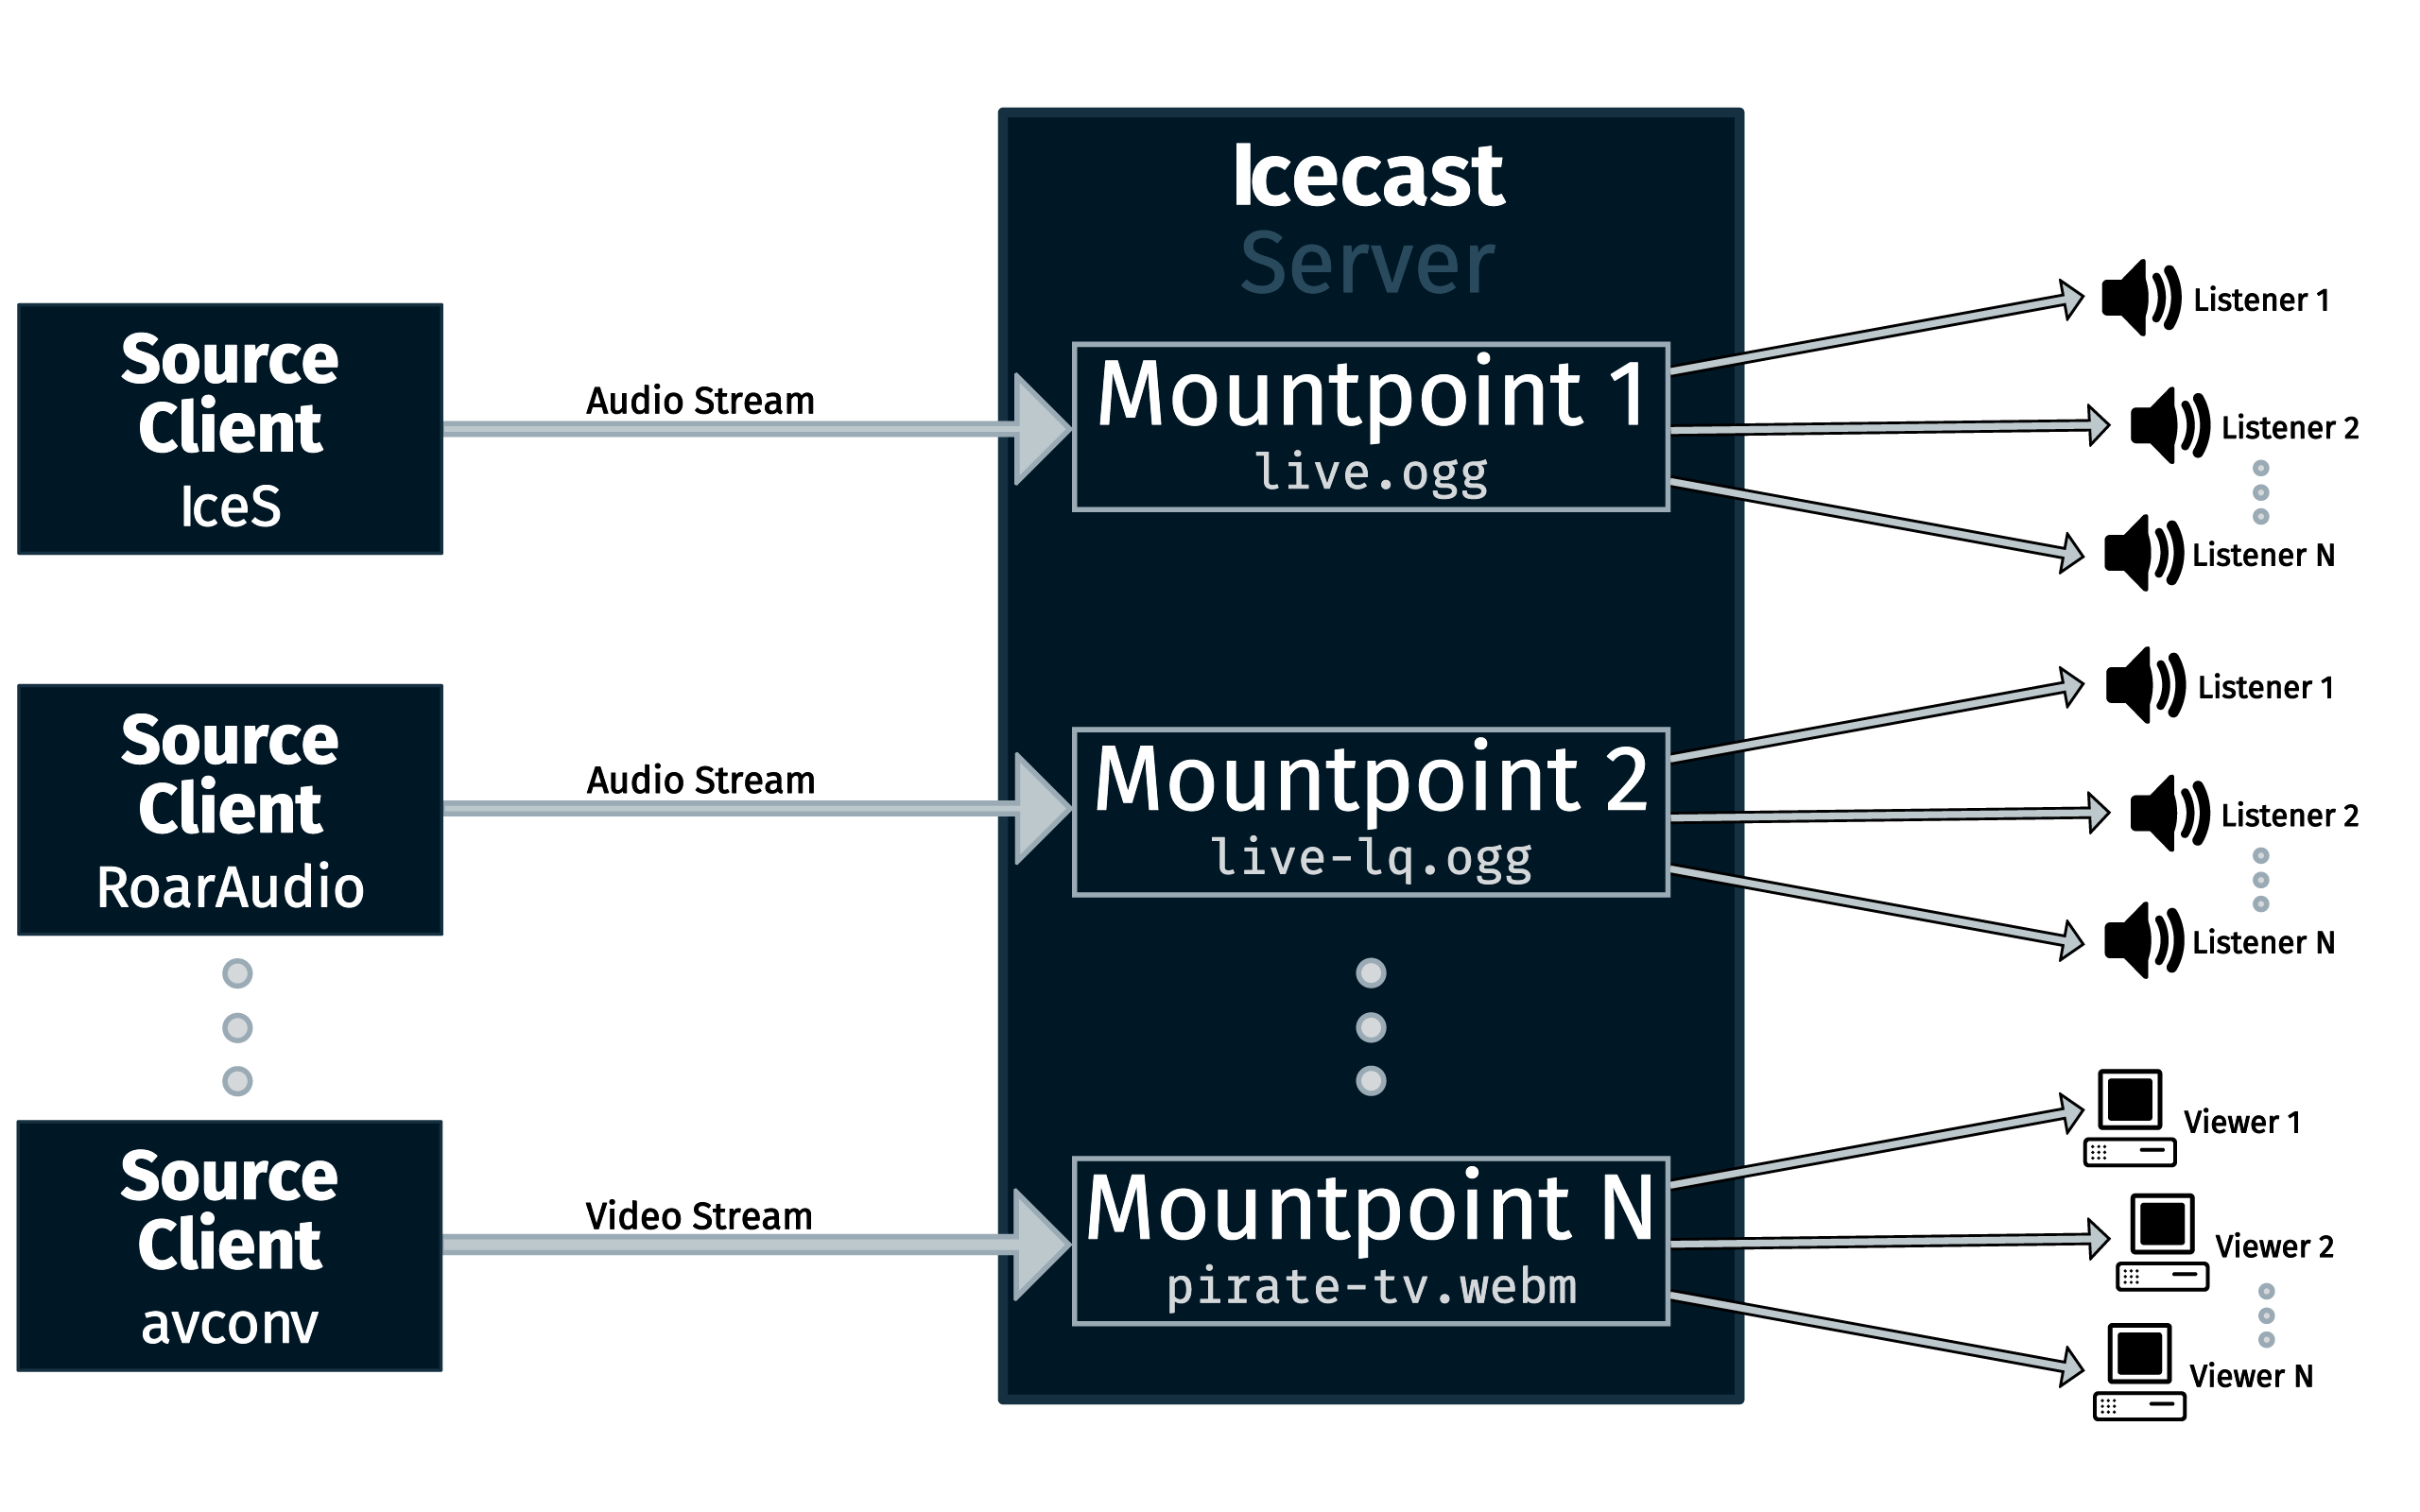 Diagram showing the components of an Icecast Server